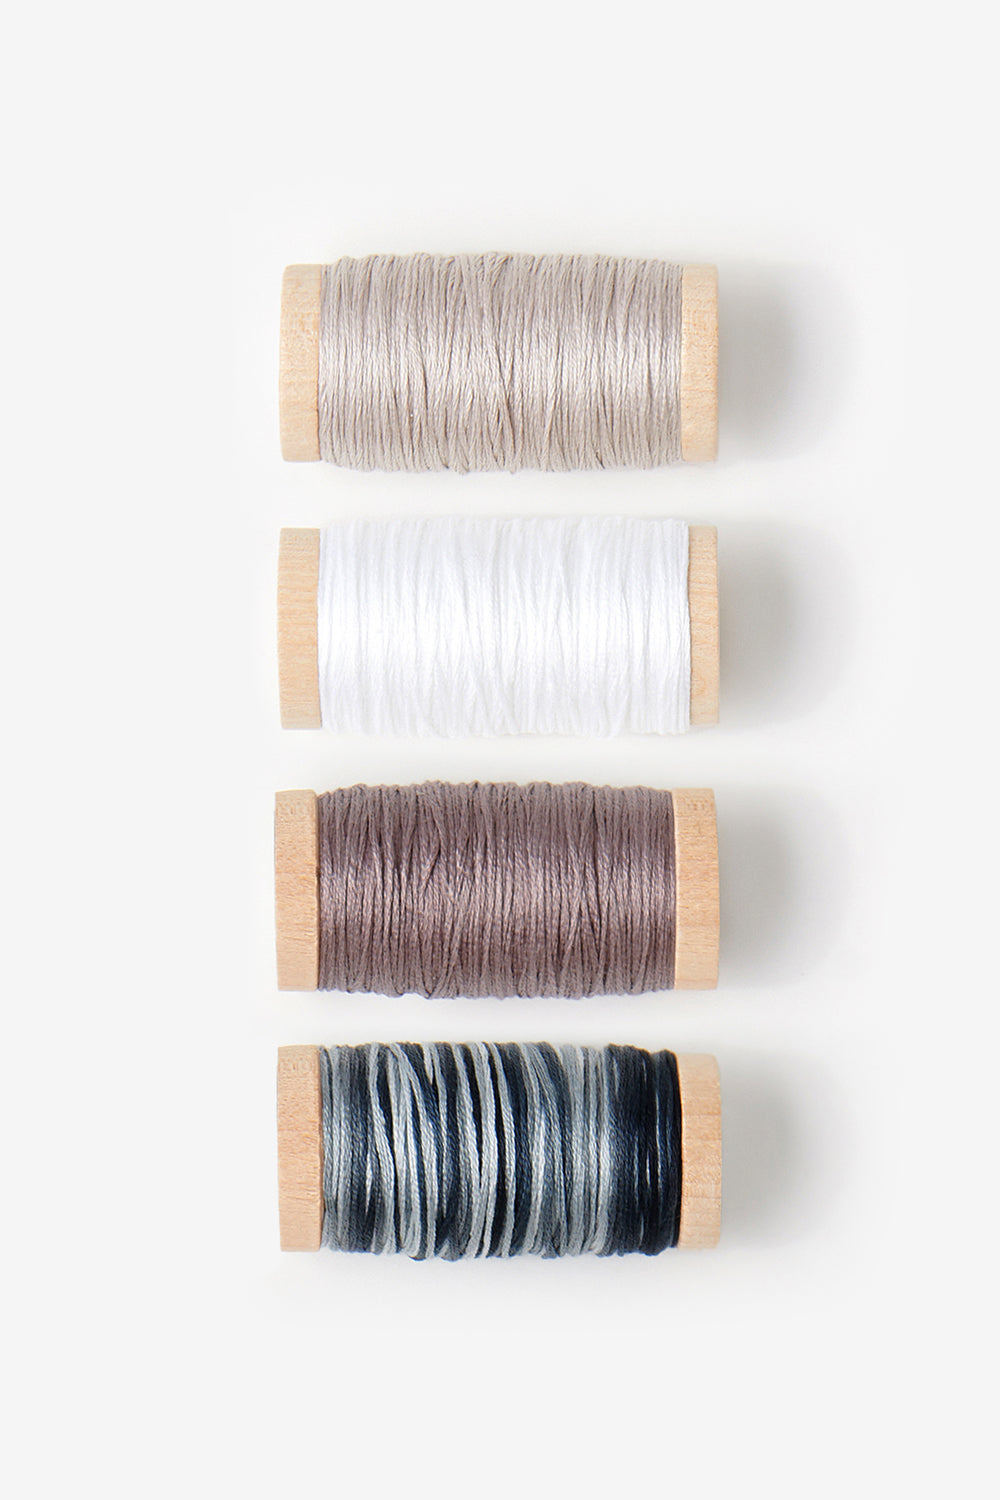 Floss bundle including silt, white, pewter, and variegated black floss.